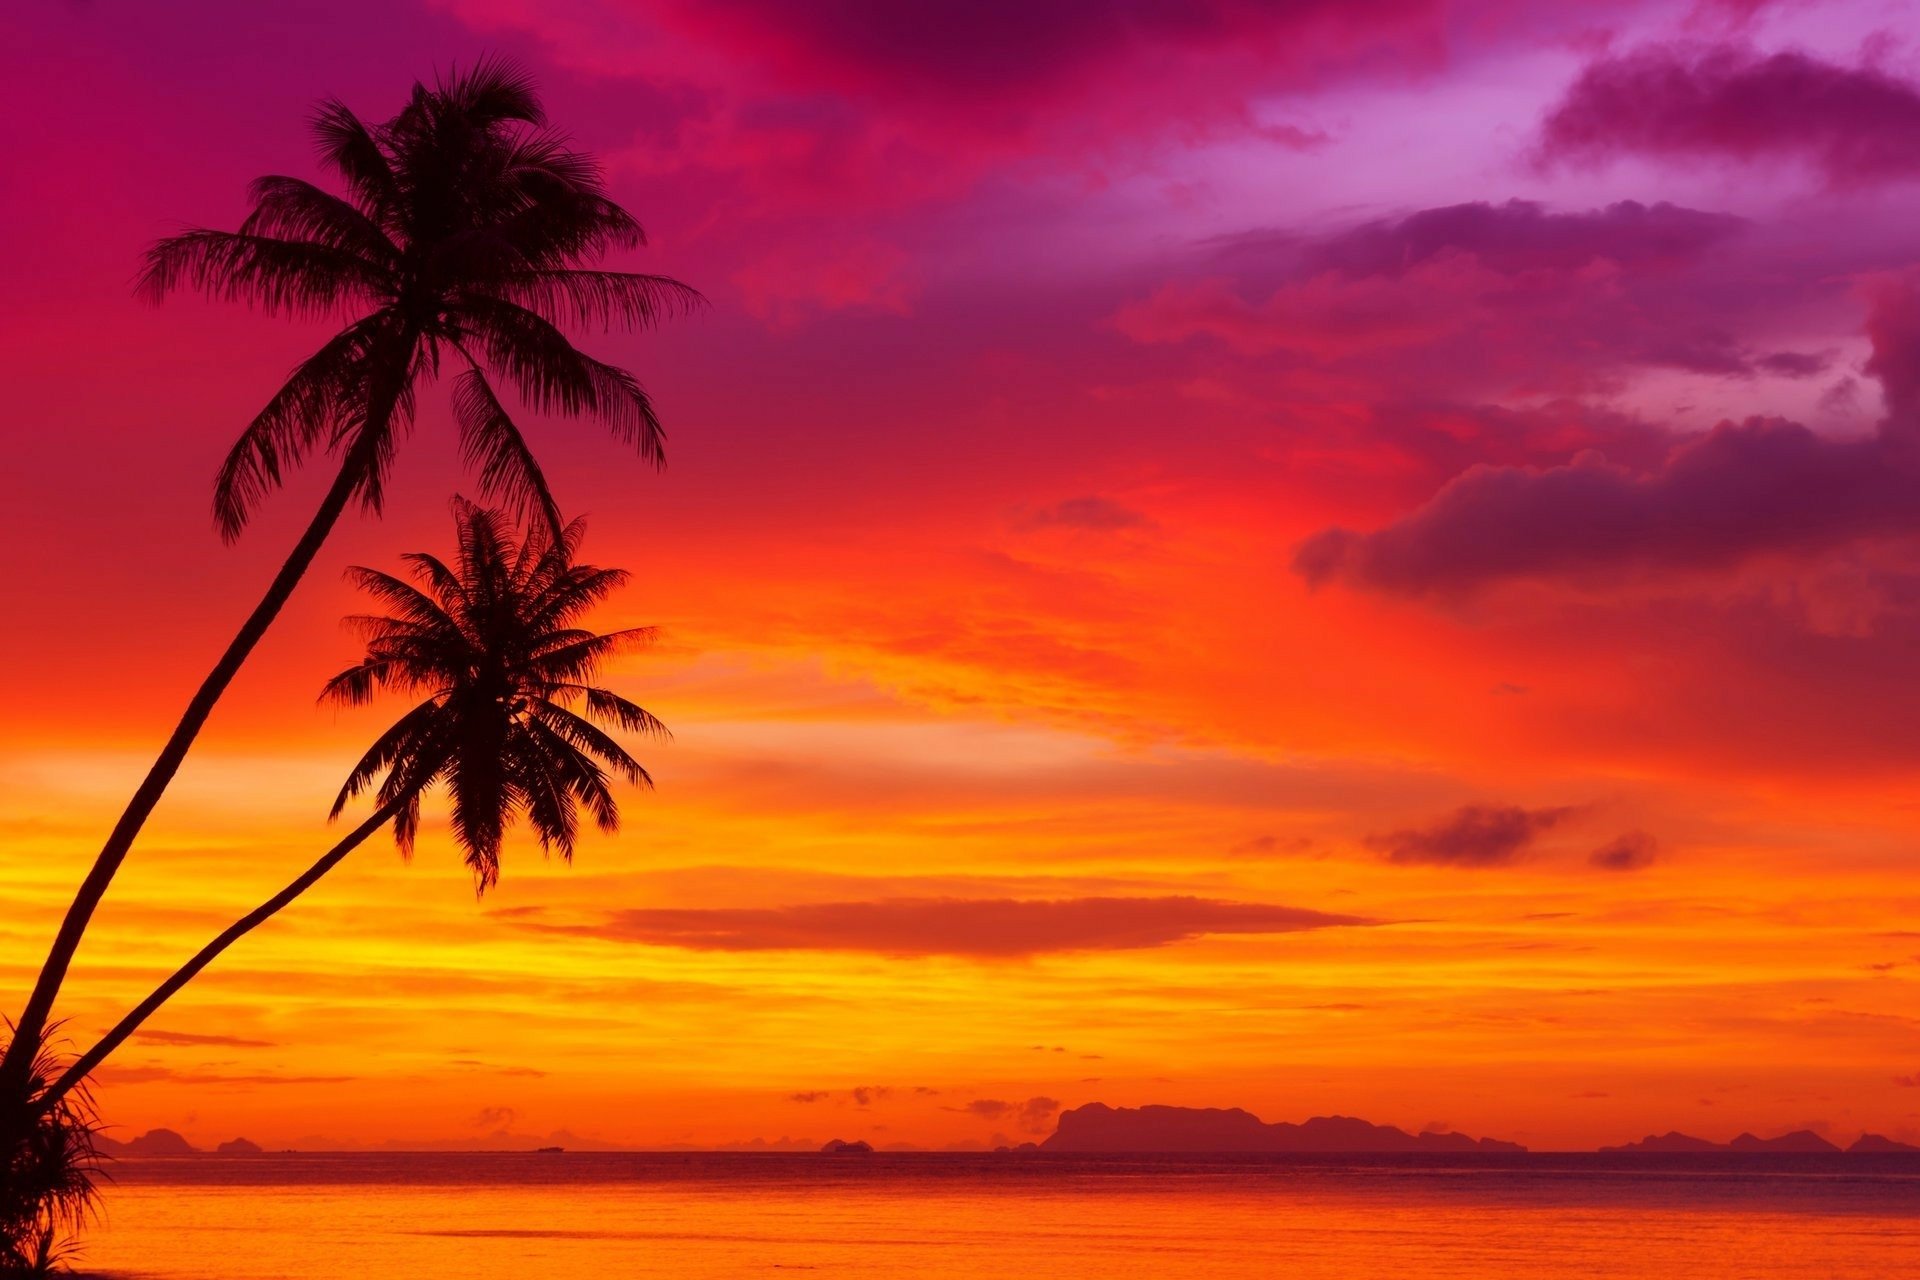 Tropical Sunset Hd Wallpaper Background Image 1920x1280